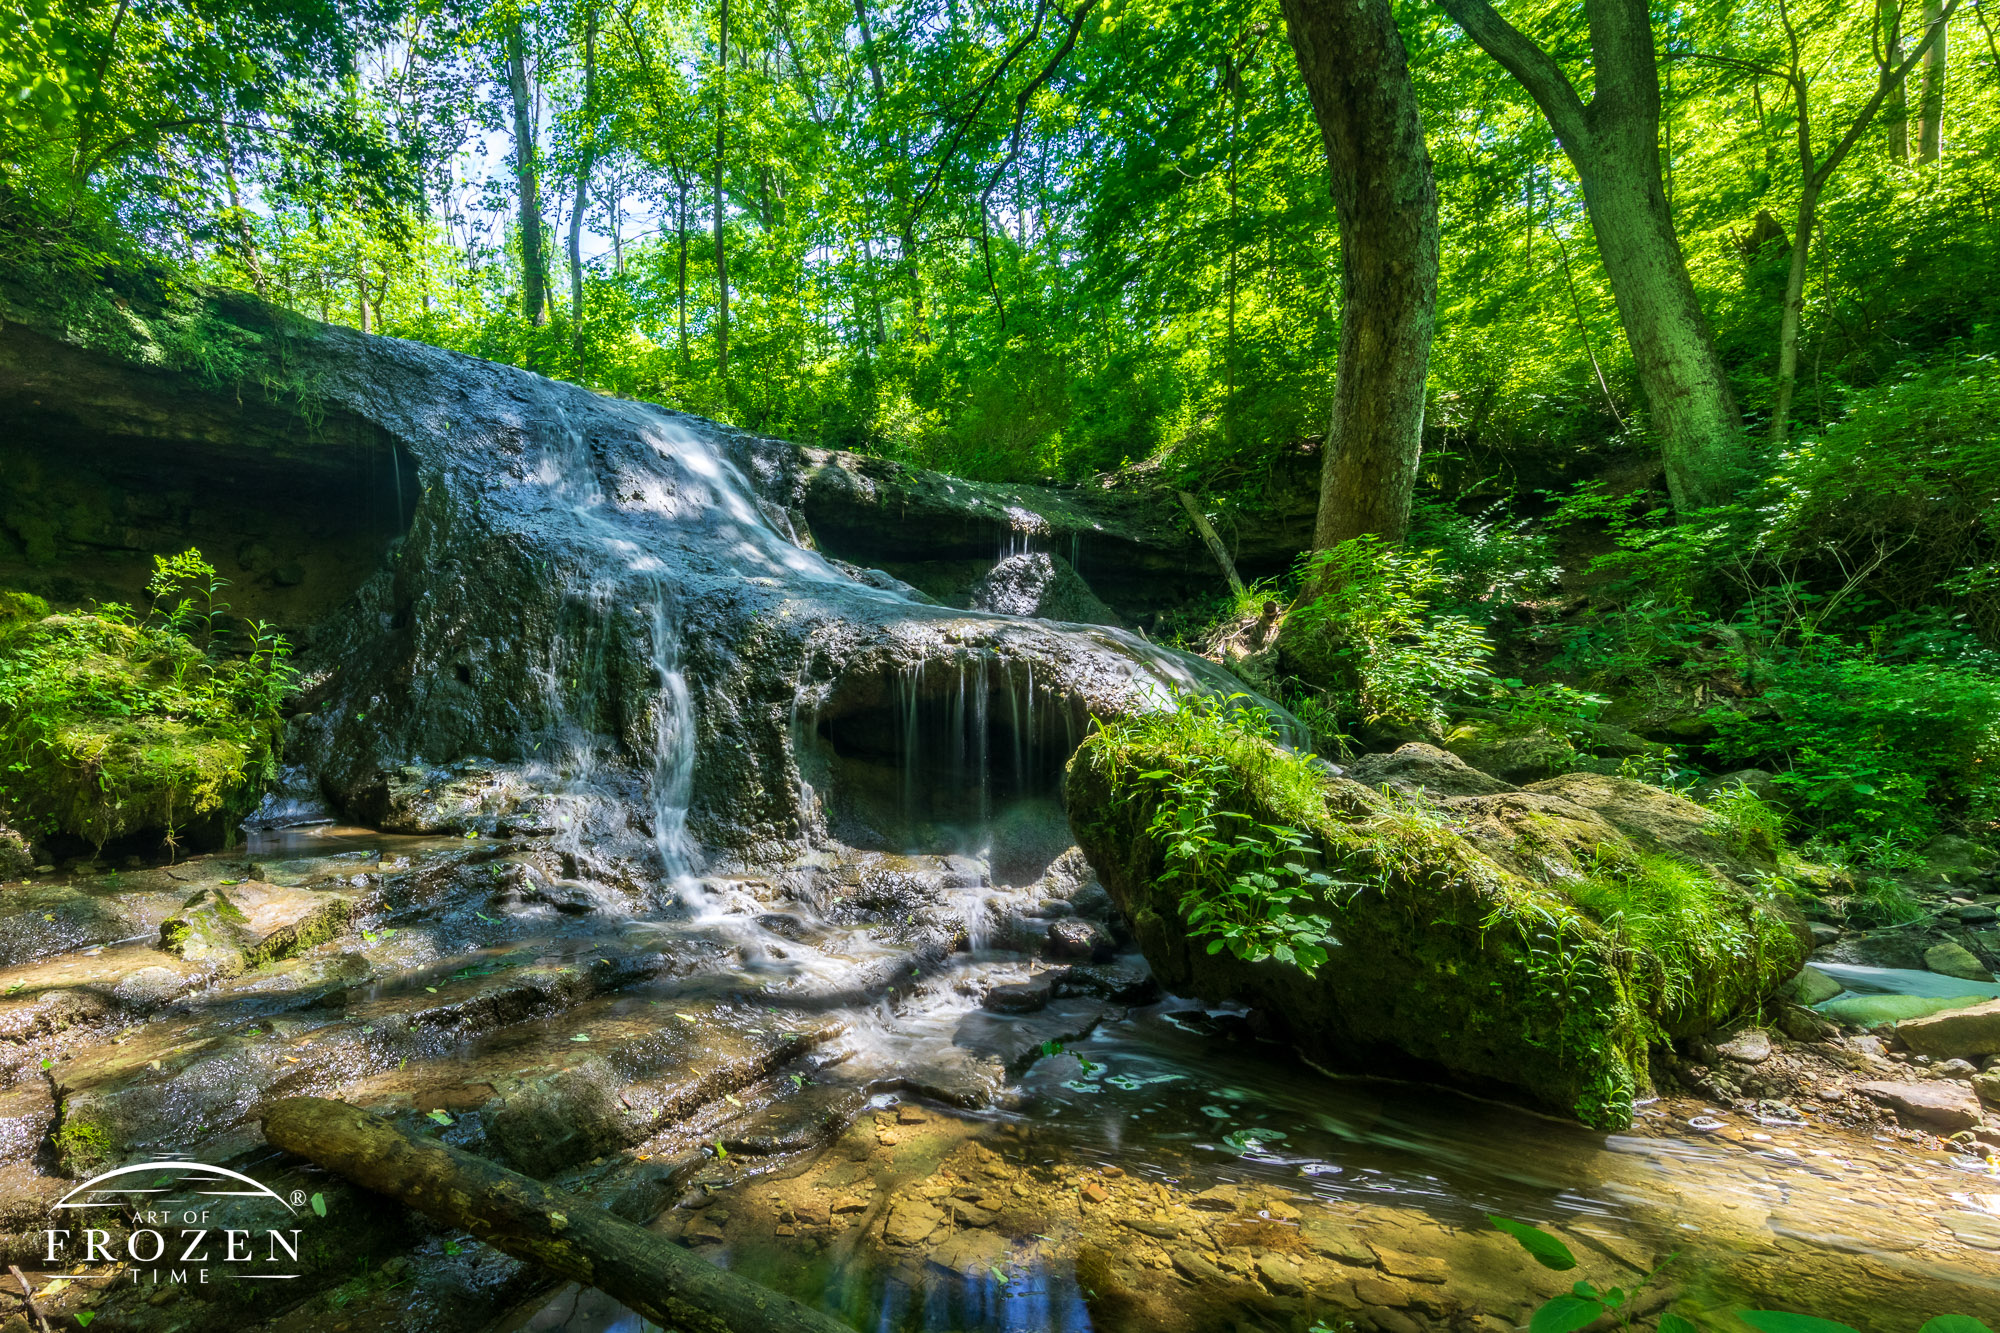 A forest waterfall where upstream sediments have created a gentle slope for the water to run down.